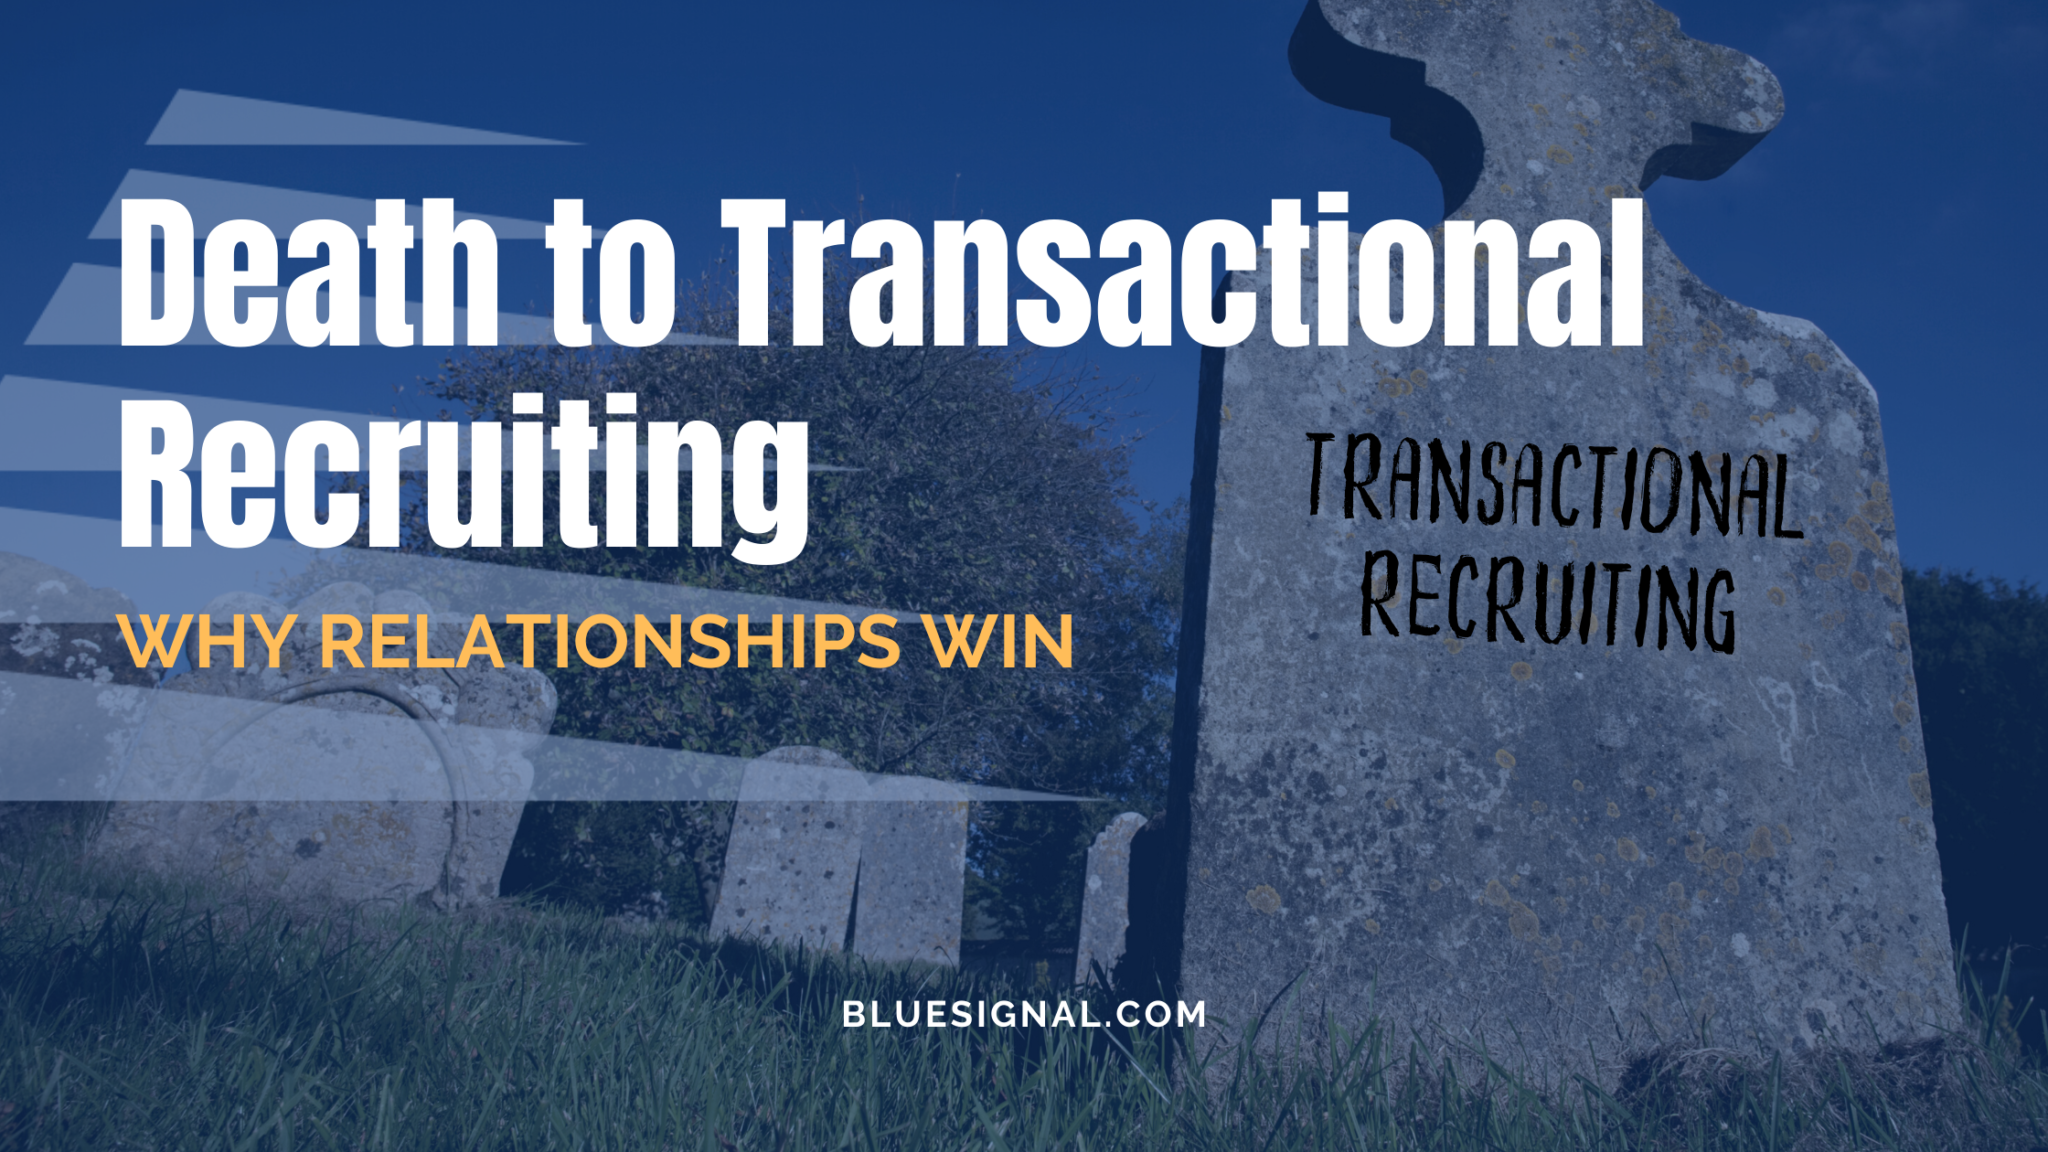 Death to Transactional Recruiting Blog Cover